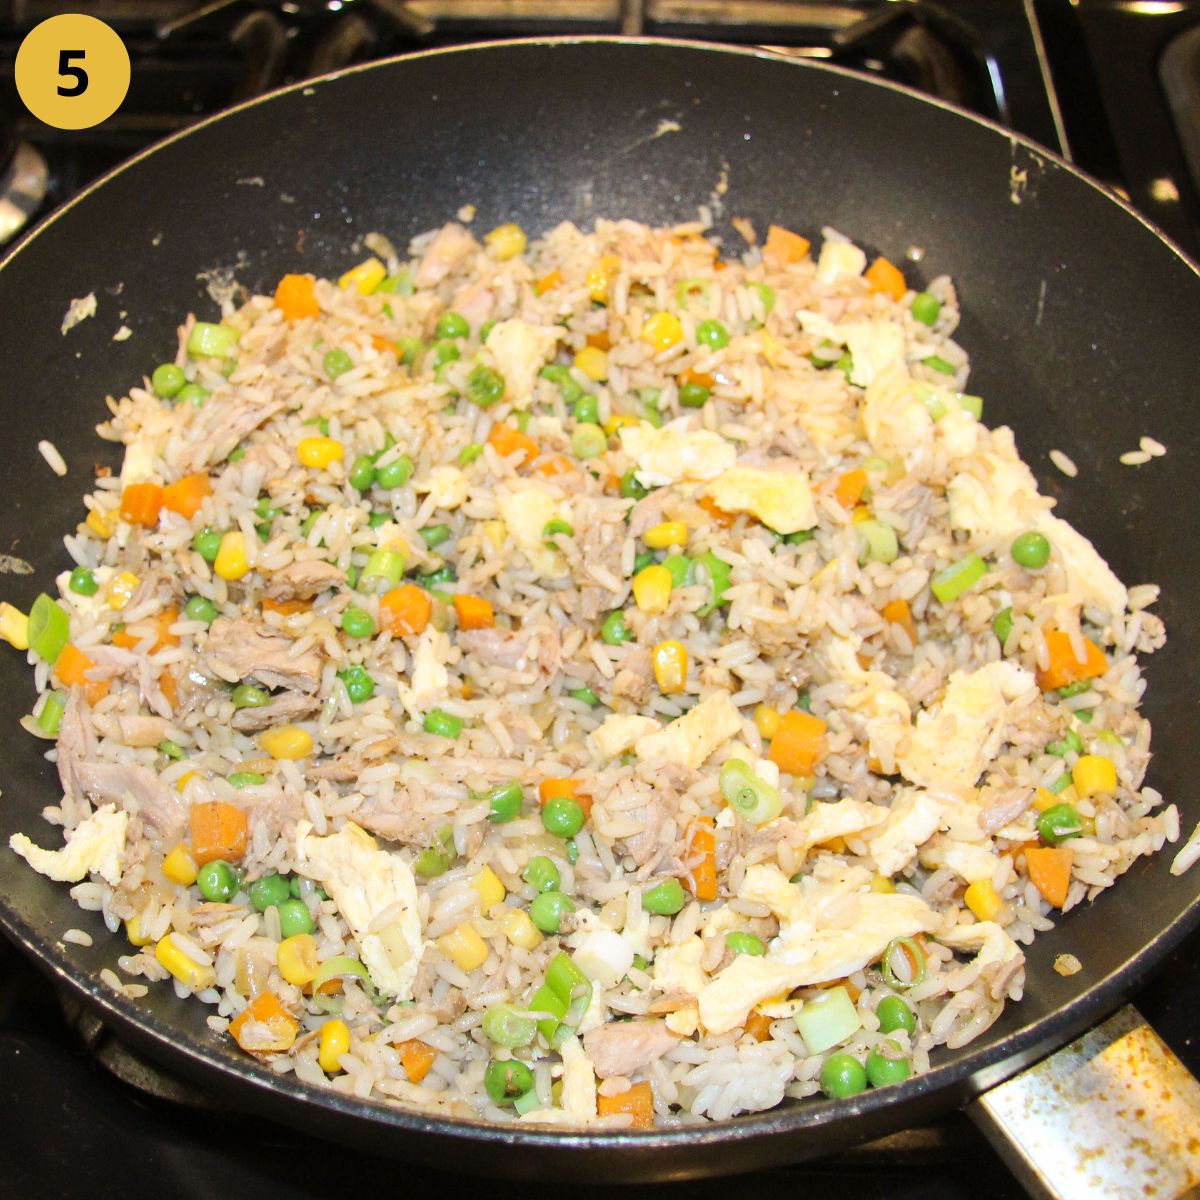 frying rice and vegetables in a large skillet.